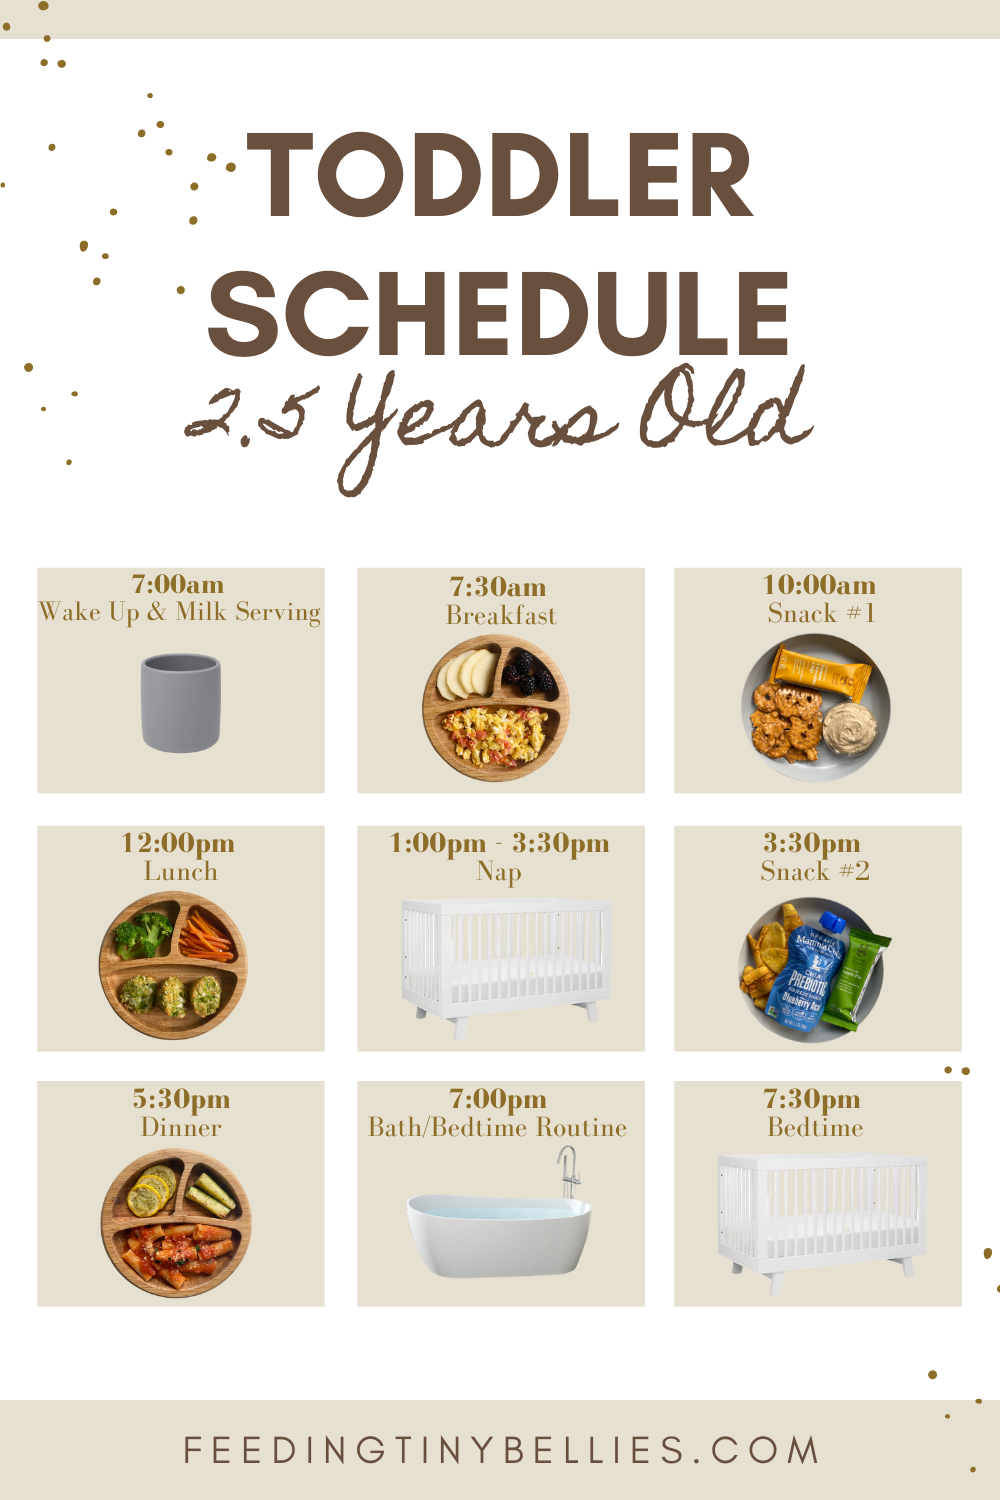 Toddler schedule 2 years old